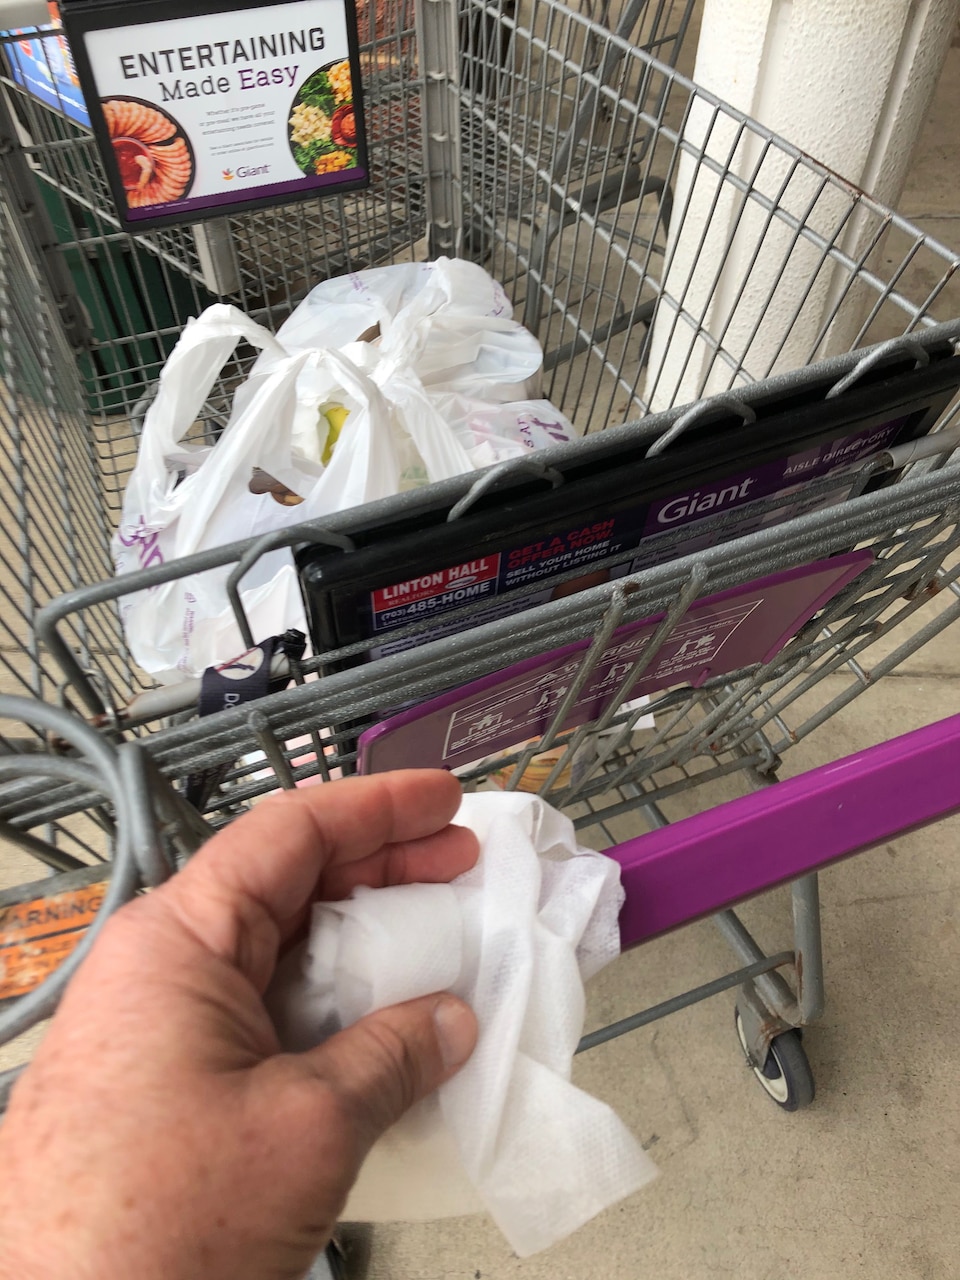 A person’s hand is holding a wipe to clean a shopping cart handle.